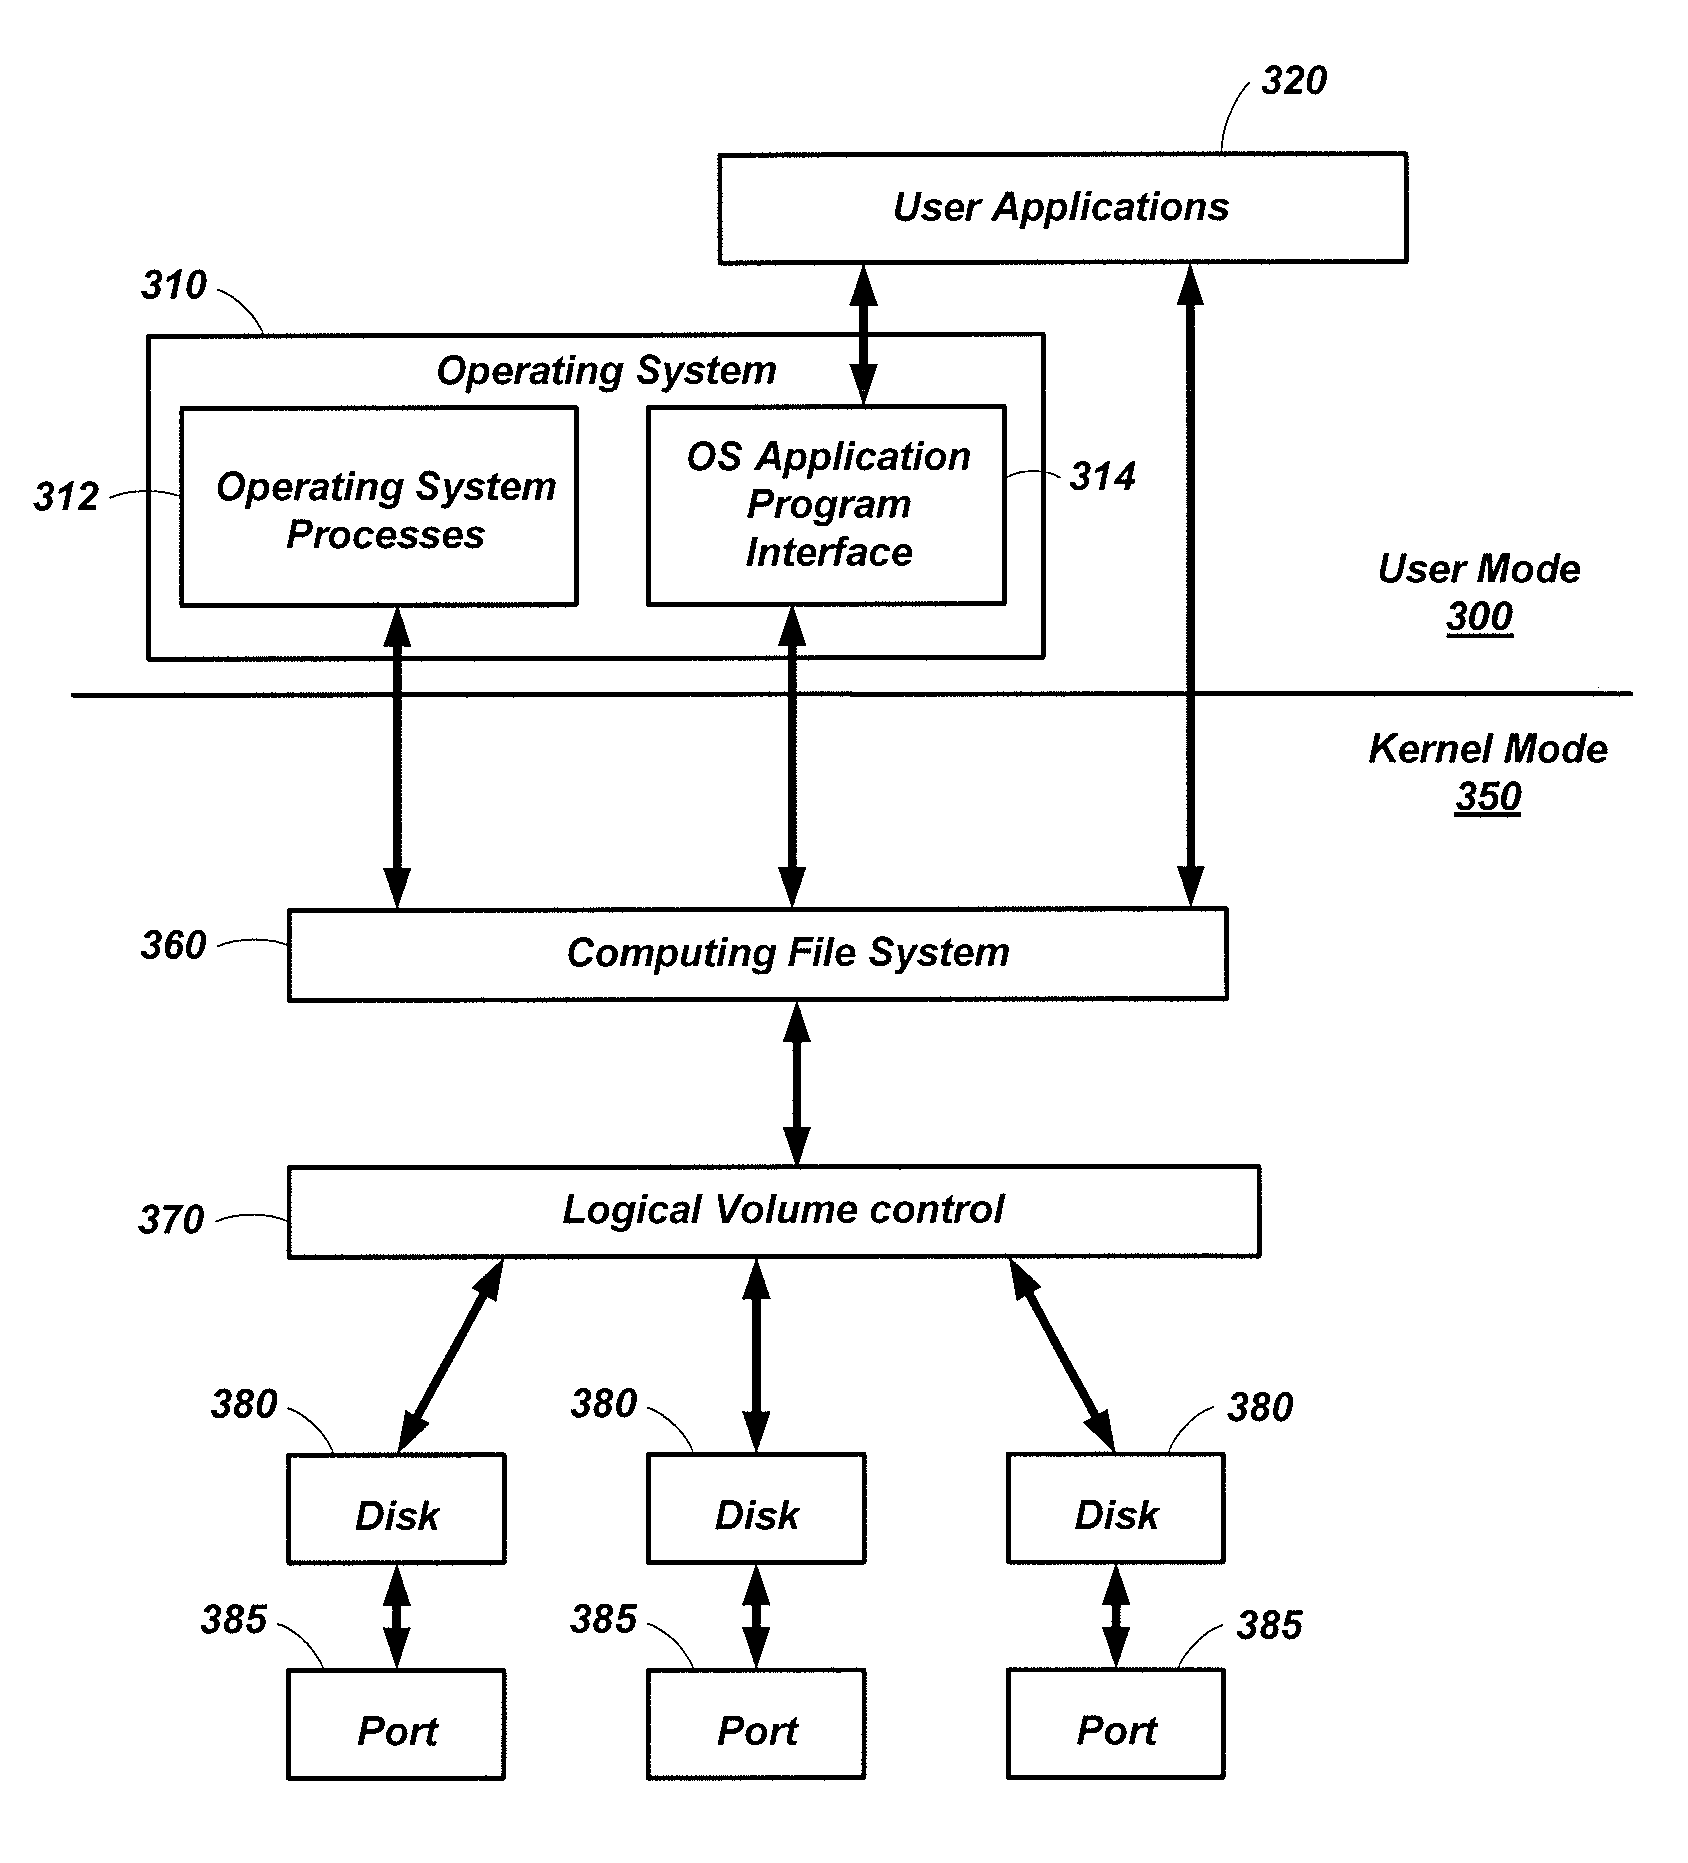 Systems, methods, and computer-readable media for backup and restoration of computer information